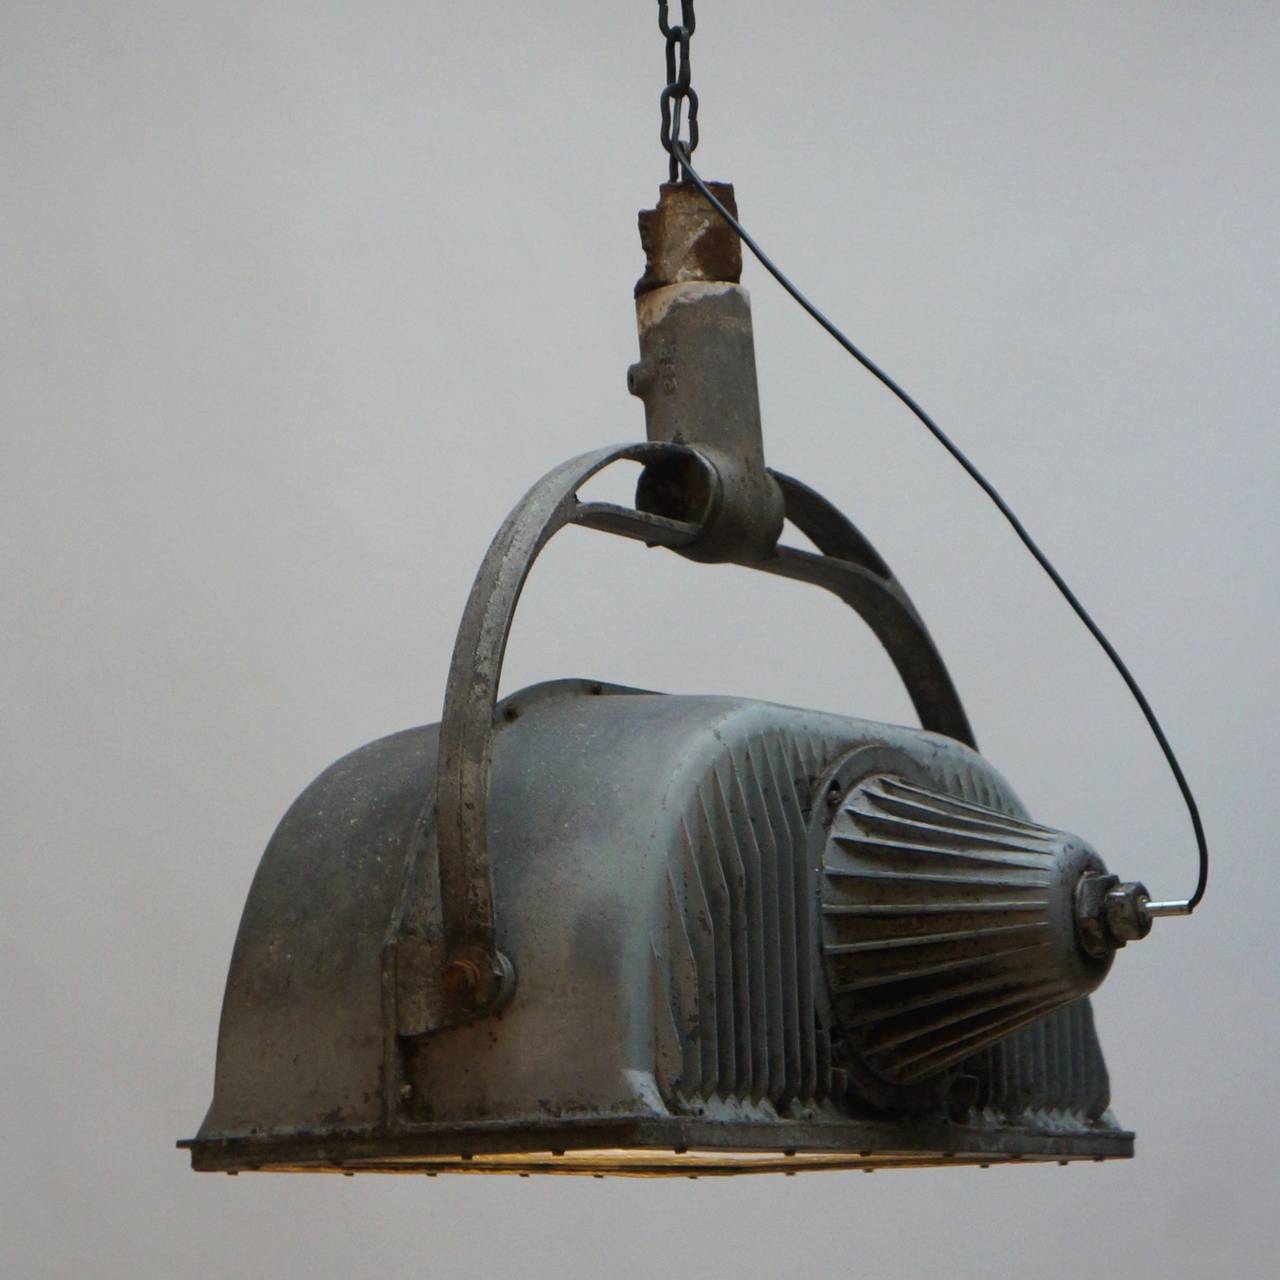 Large Industrial ceiling light fixture.